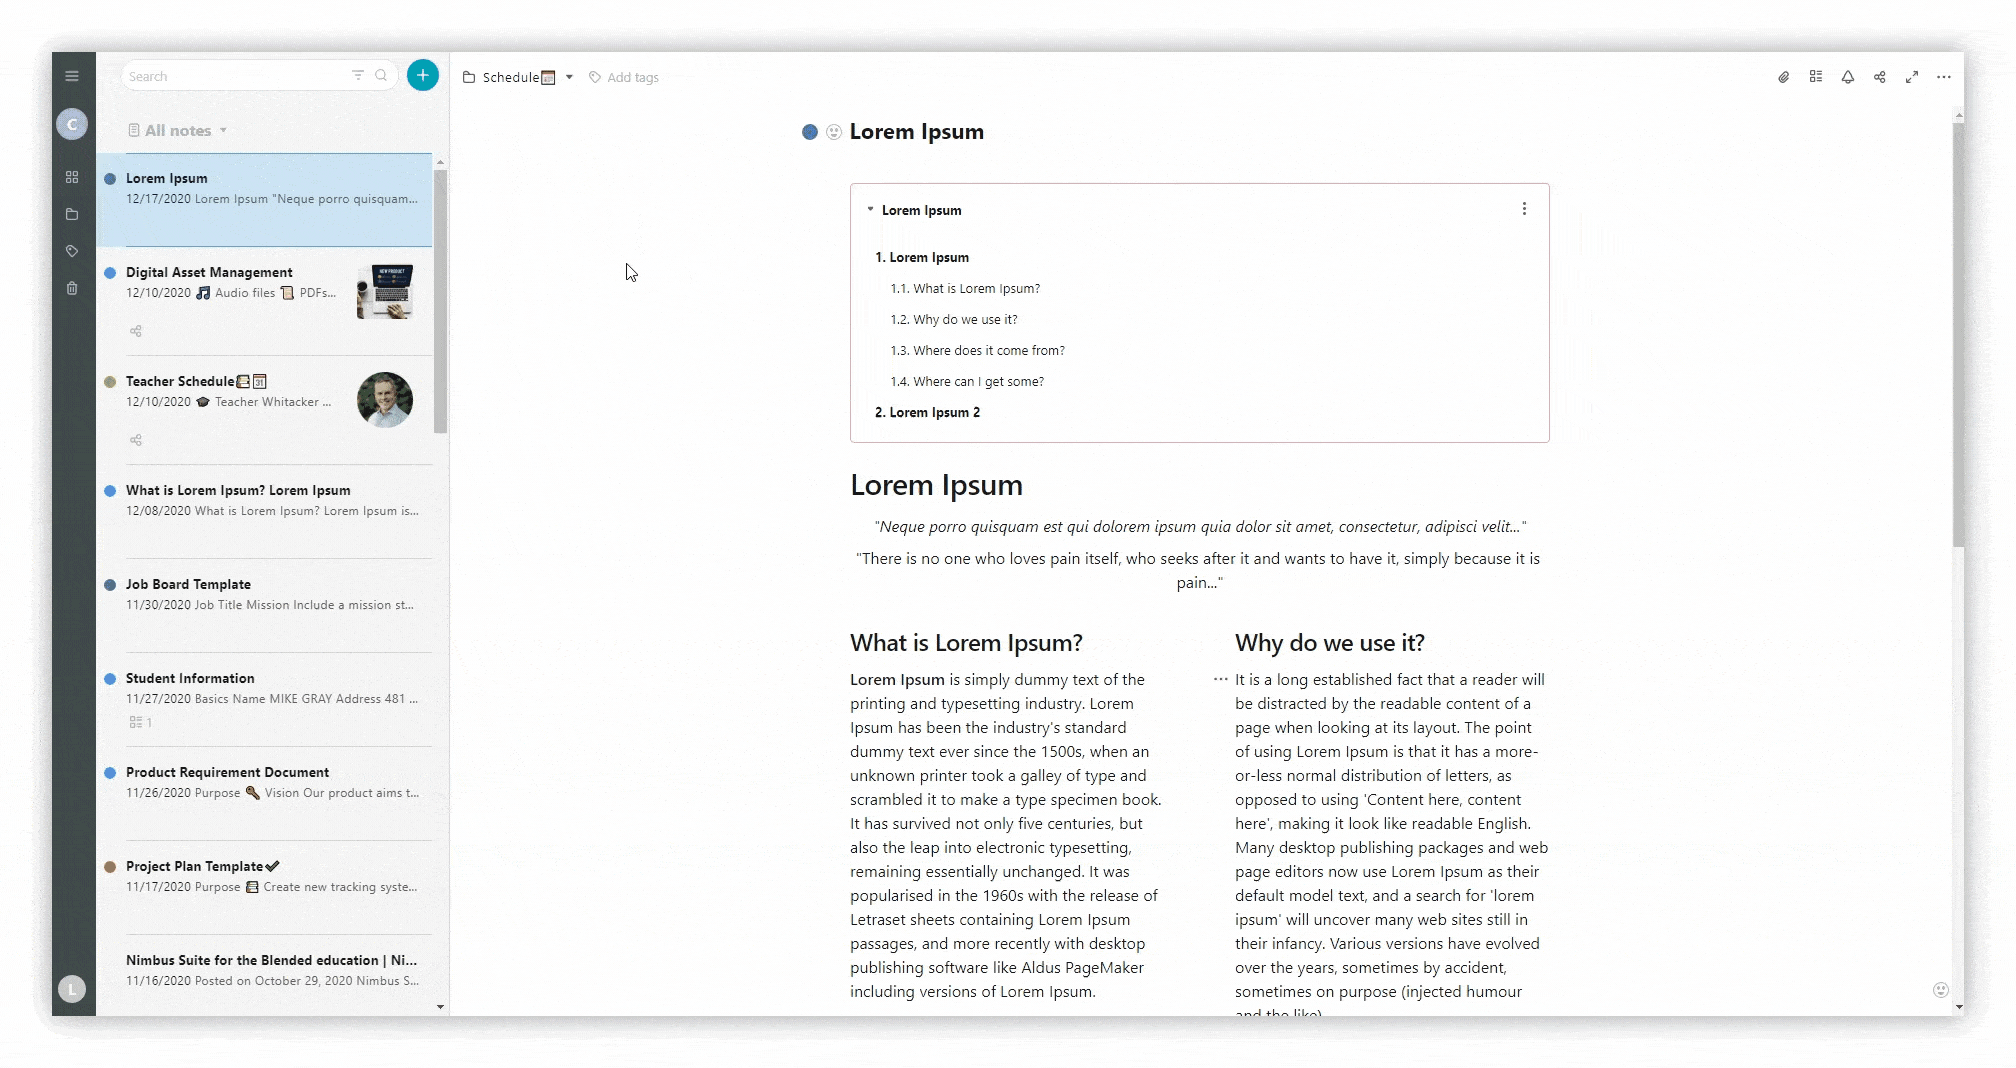 Using the outline, you can create a table of contents for your page. This is a handy tool for long pages, articles, documents, wikis, and so on.